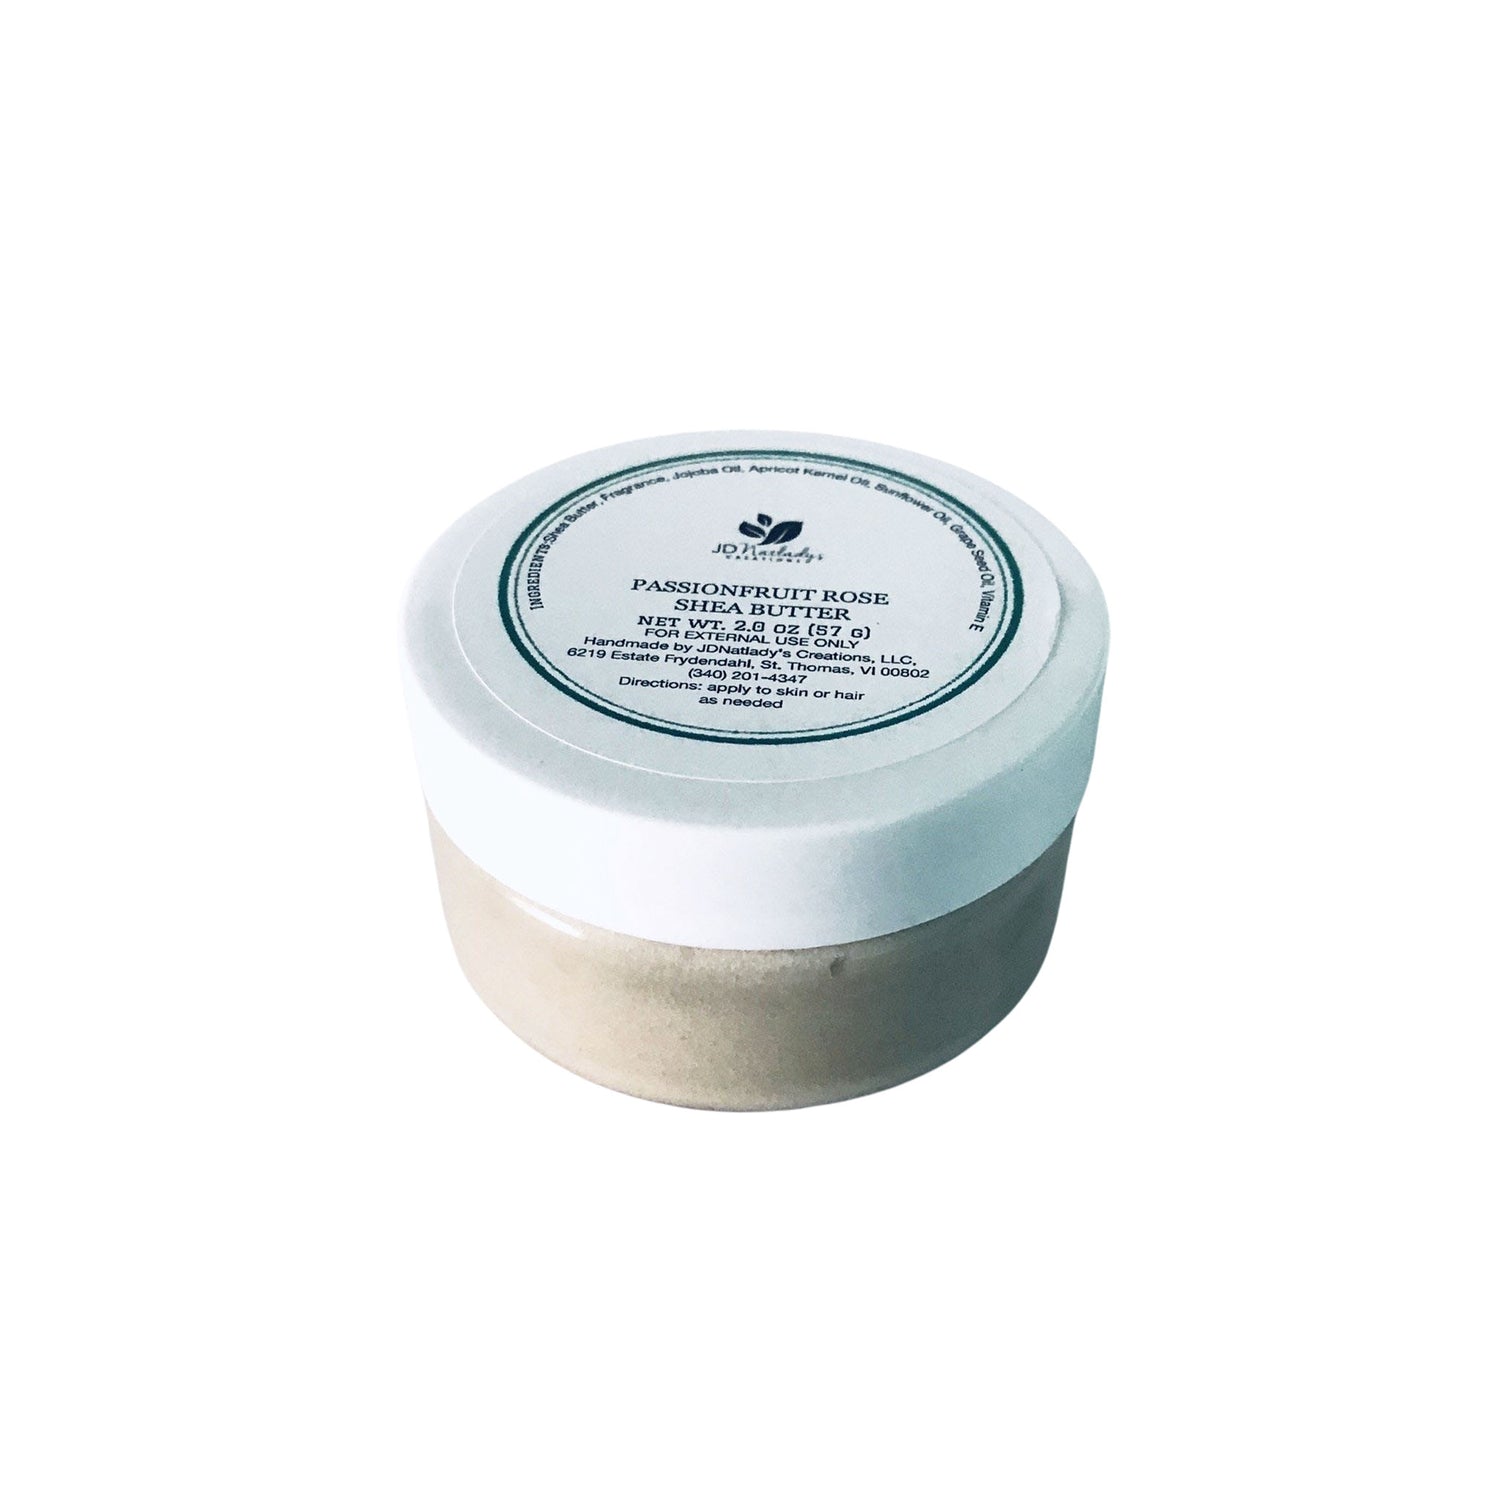 whipped scented shea body & hair butter